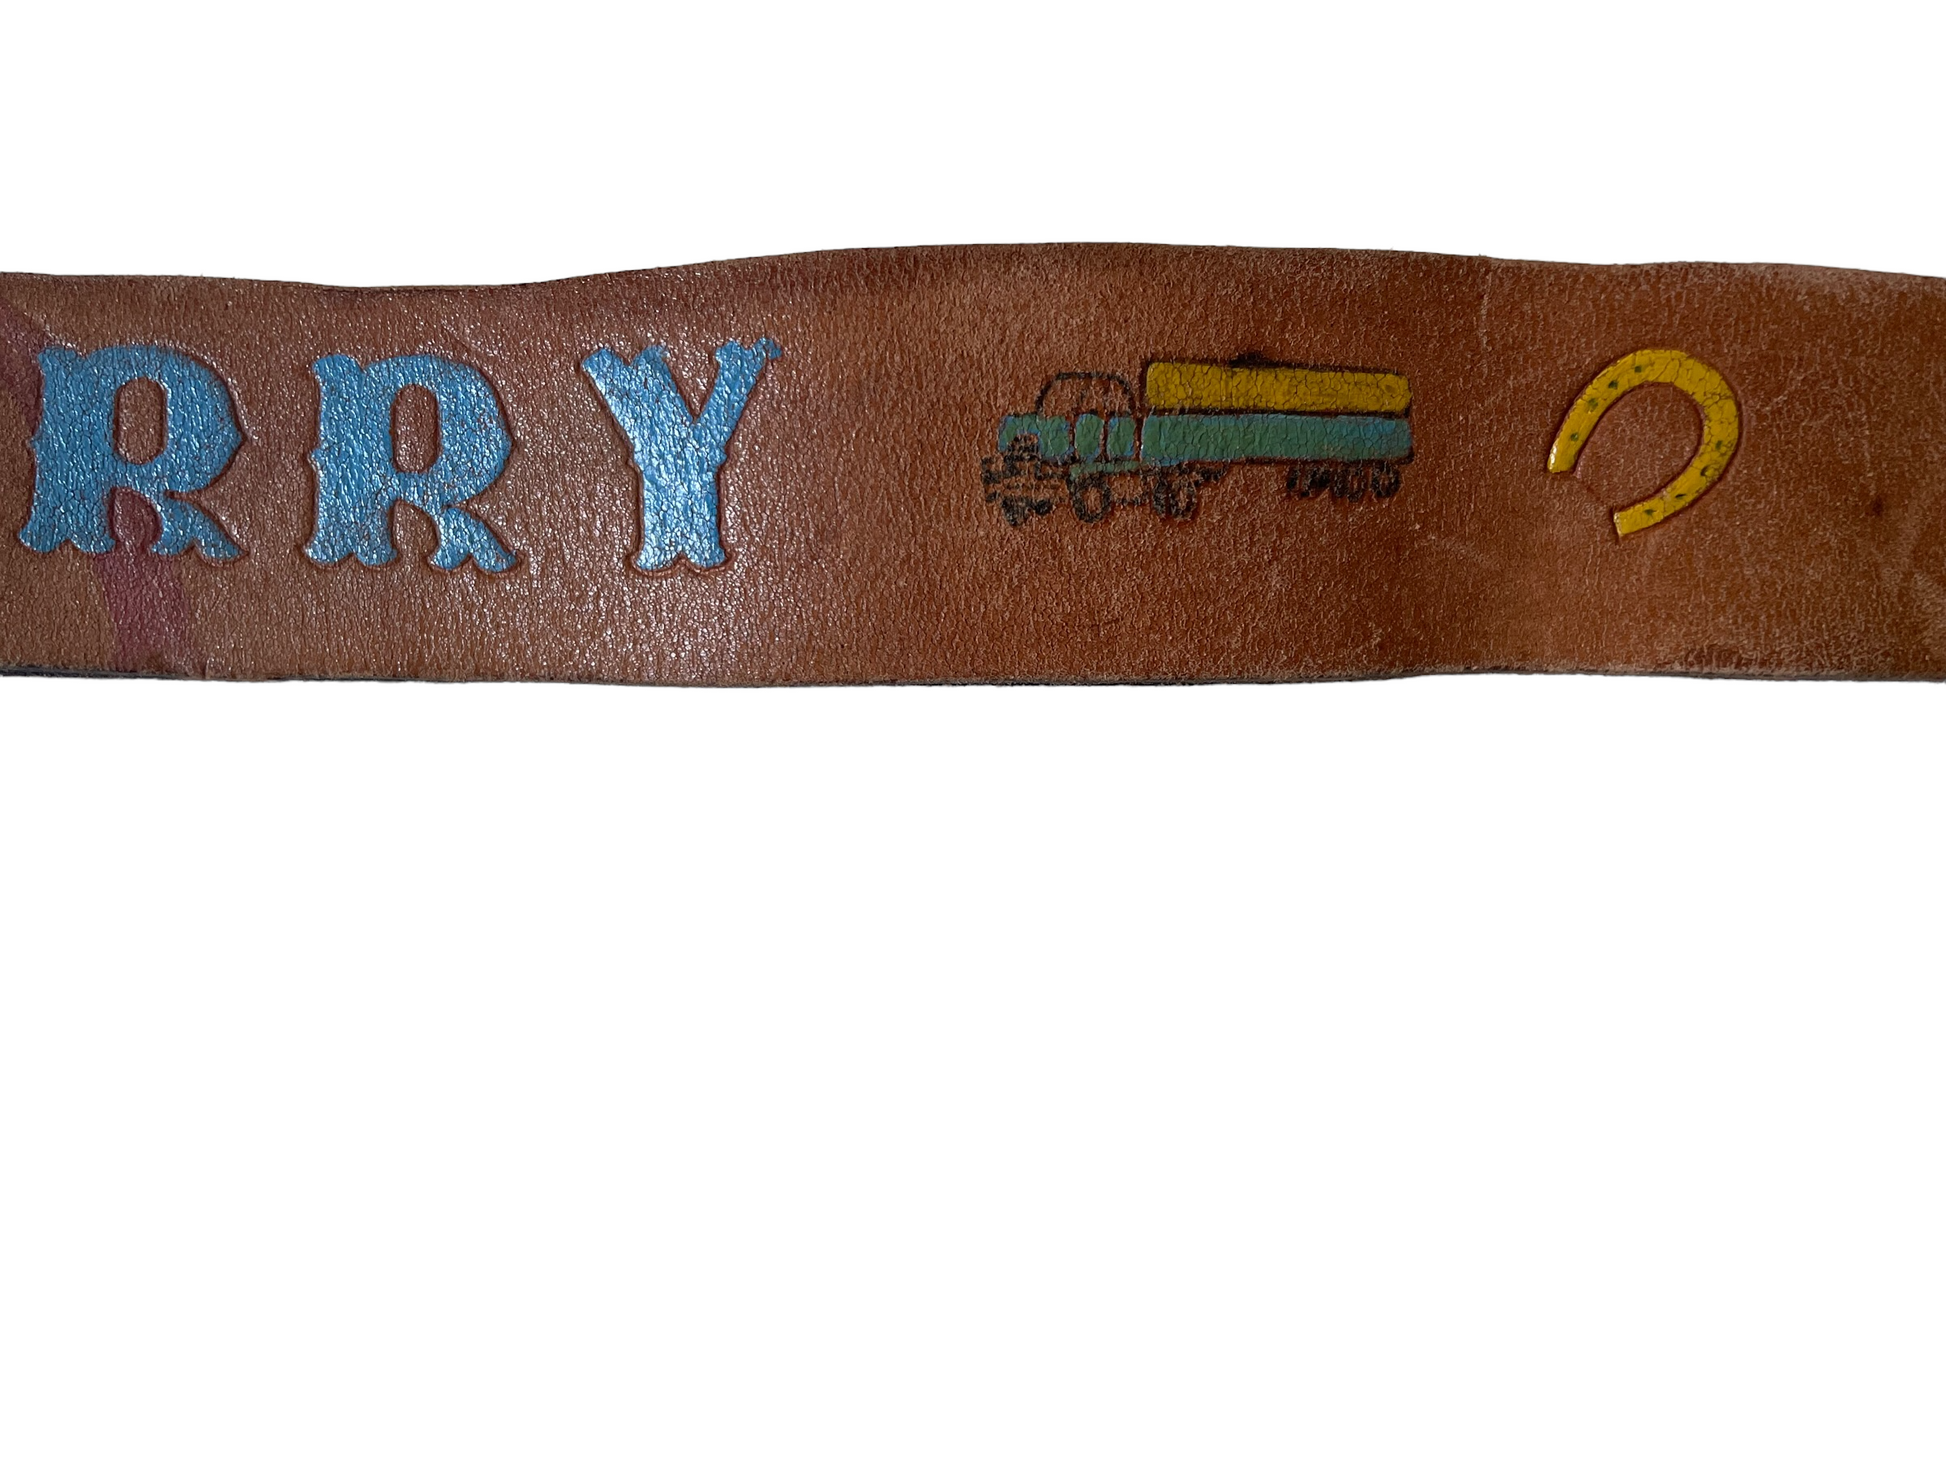 Vintage Hand Painted Coors Trucker Belt View of hand painted belt.